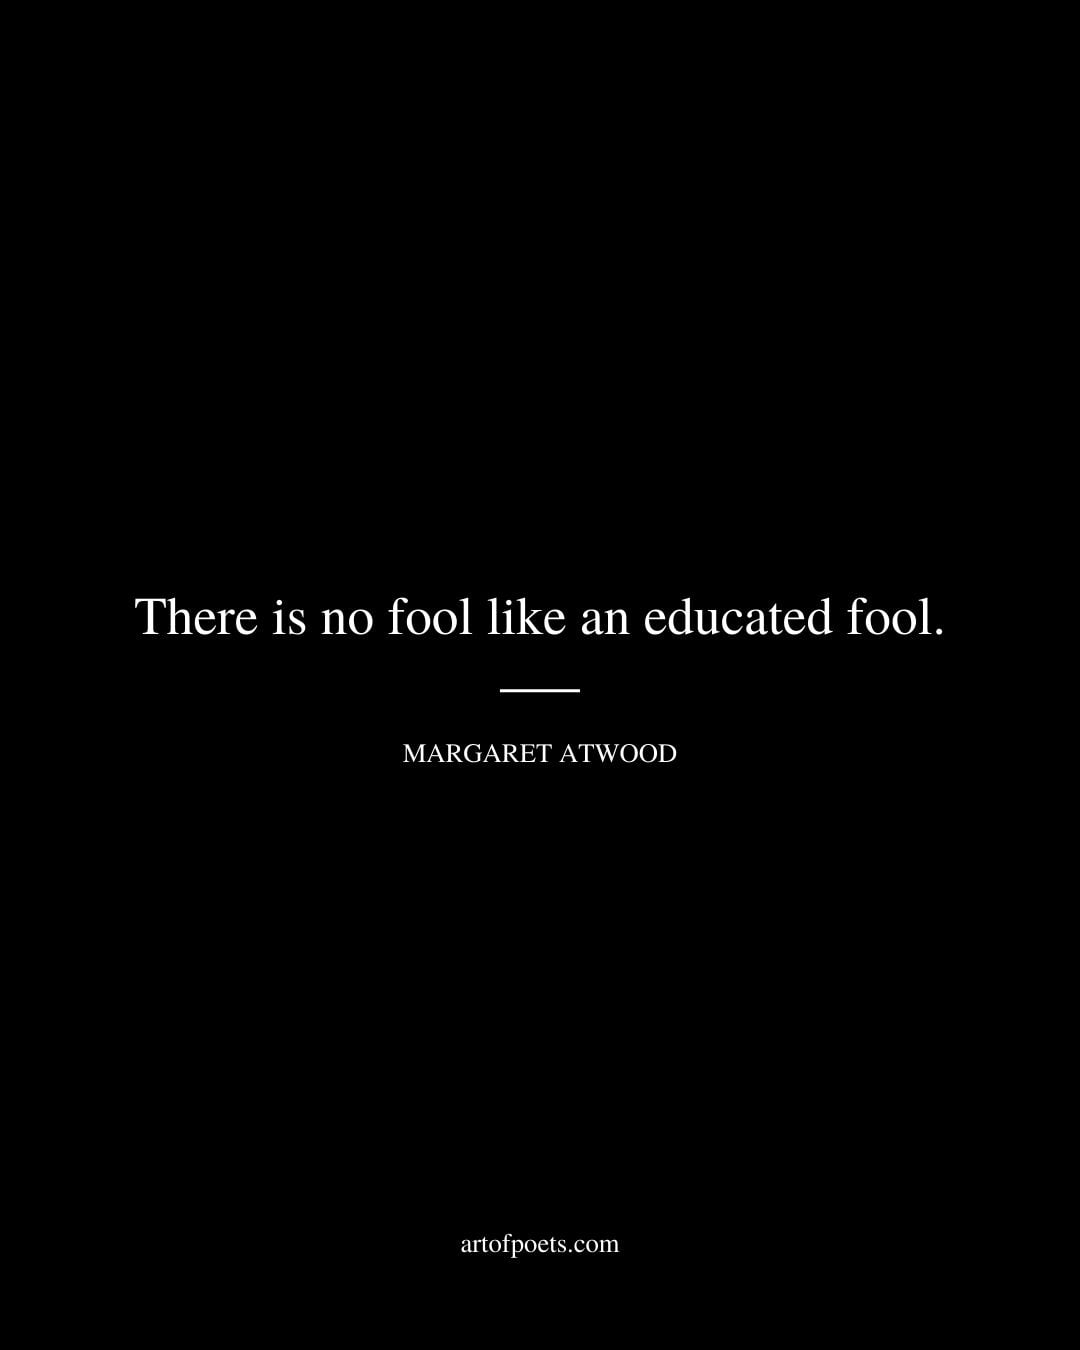 There is no fool like an educated fool. Margaret Atwood